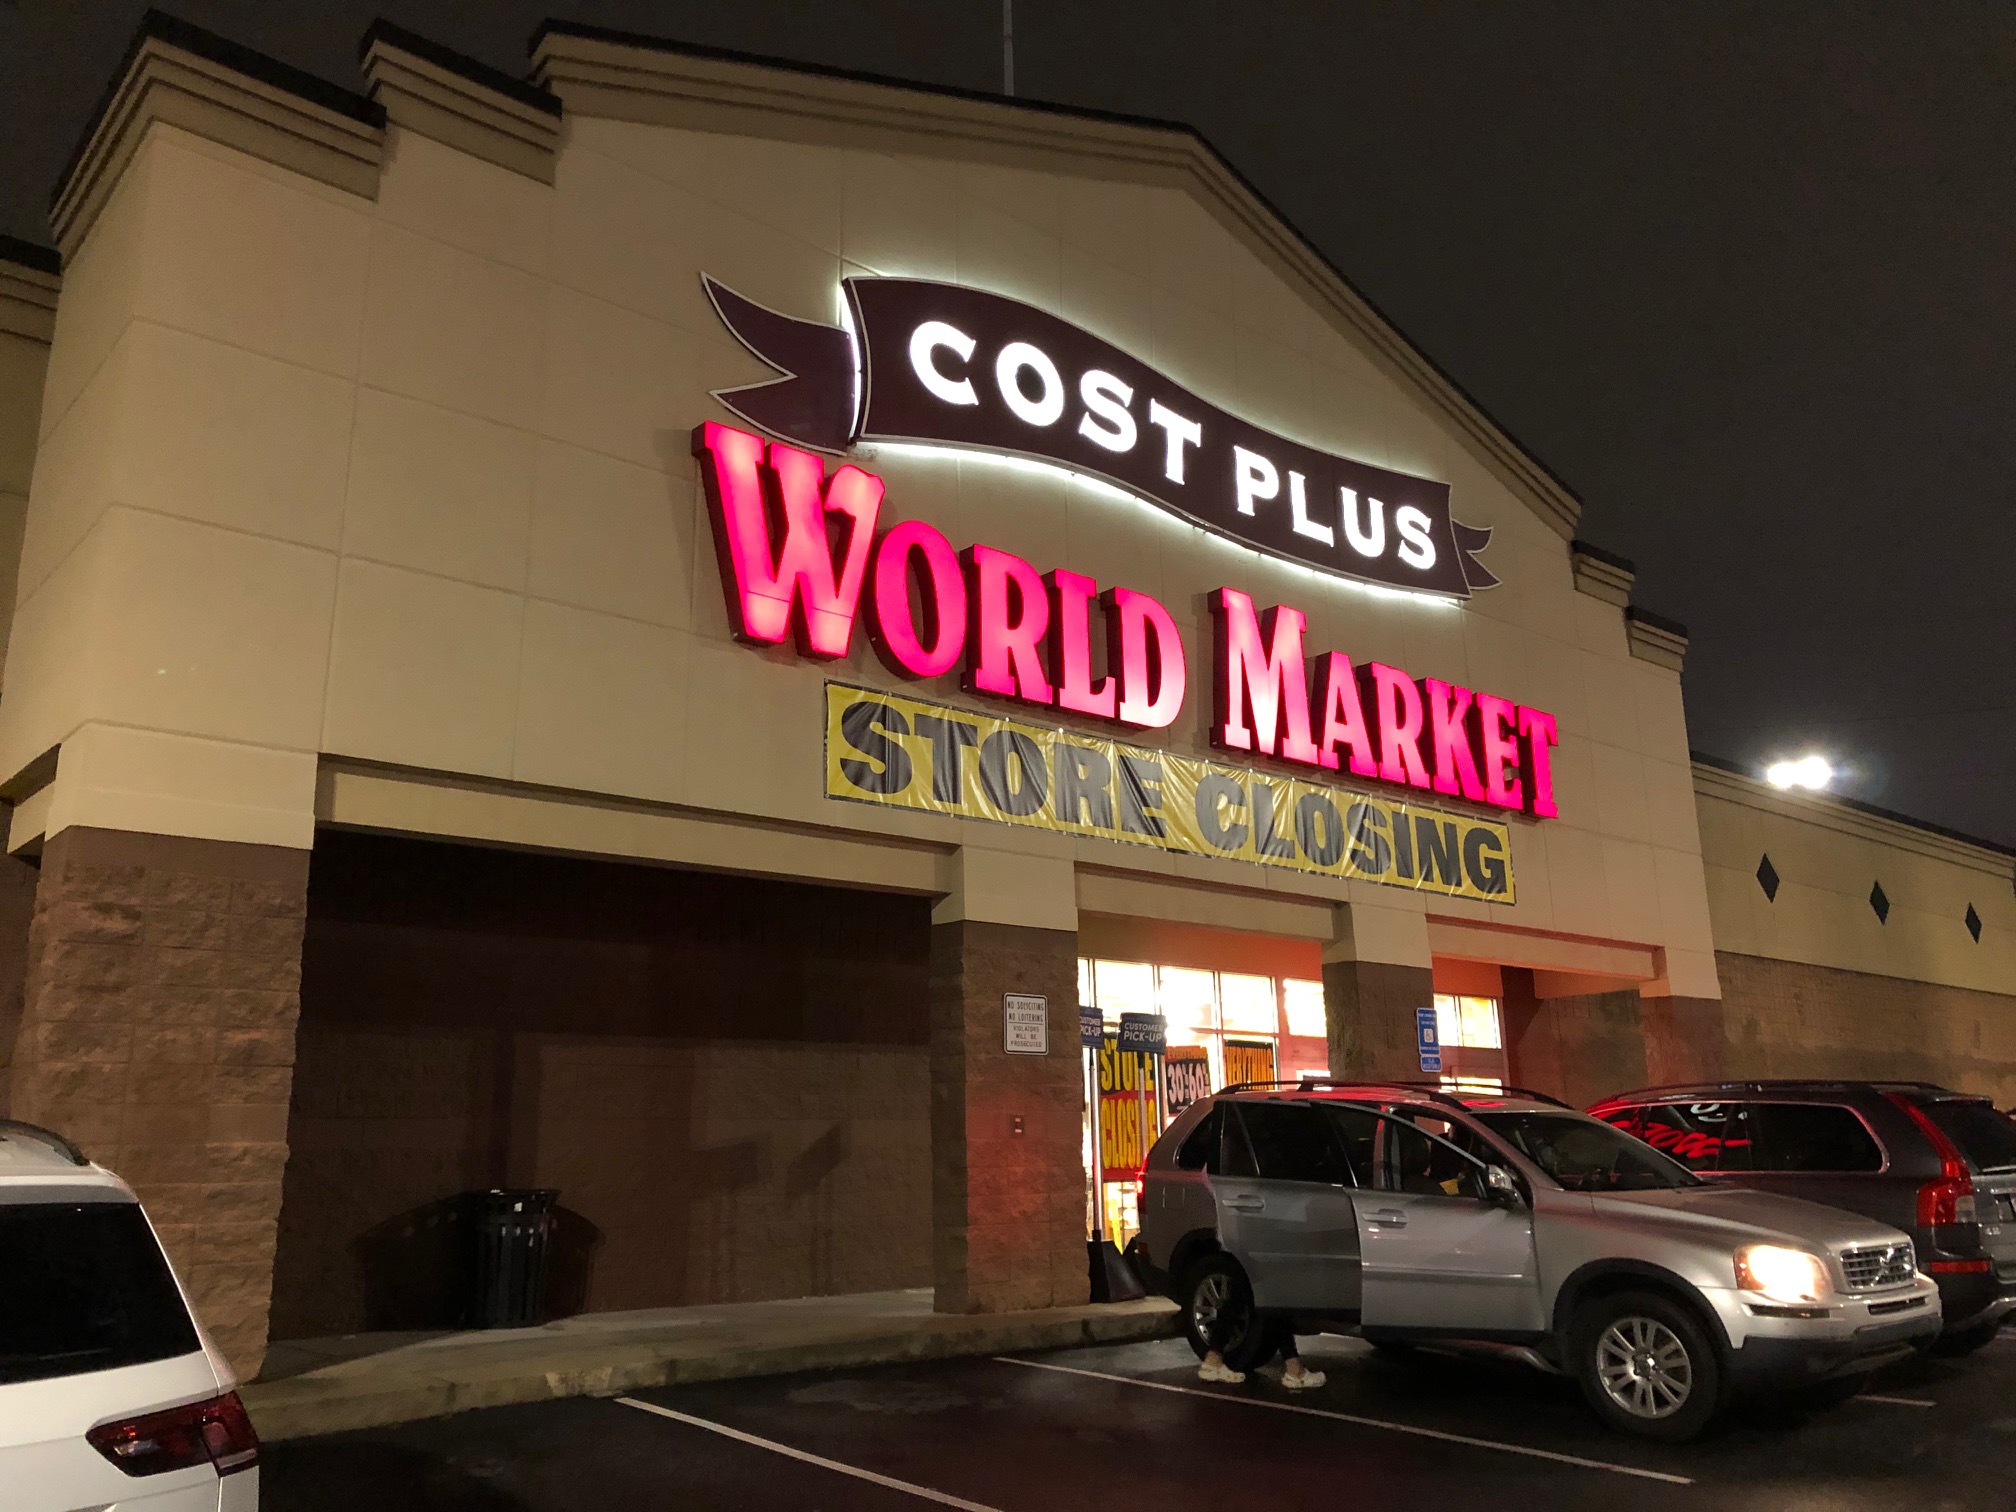 Visit This Massive World Market That Has More The 5,000 Stores